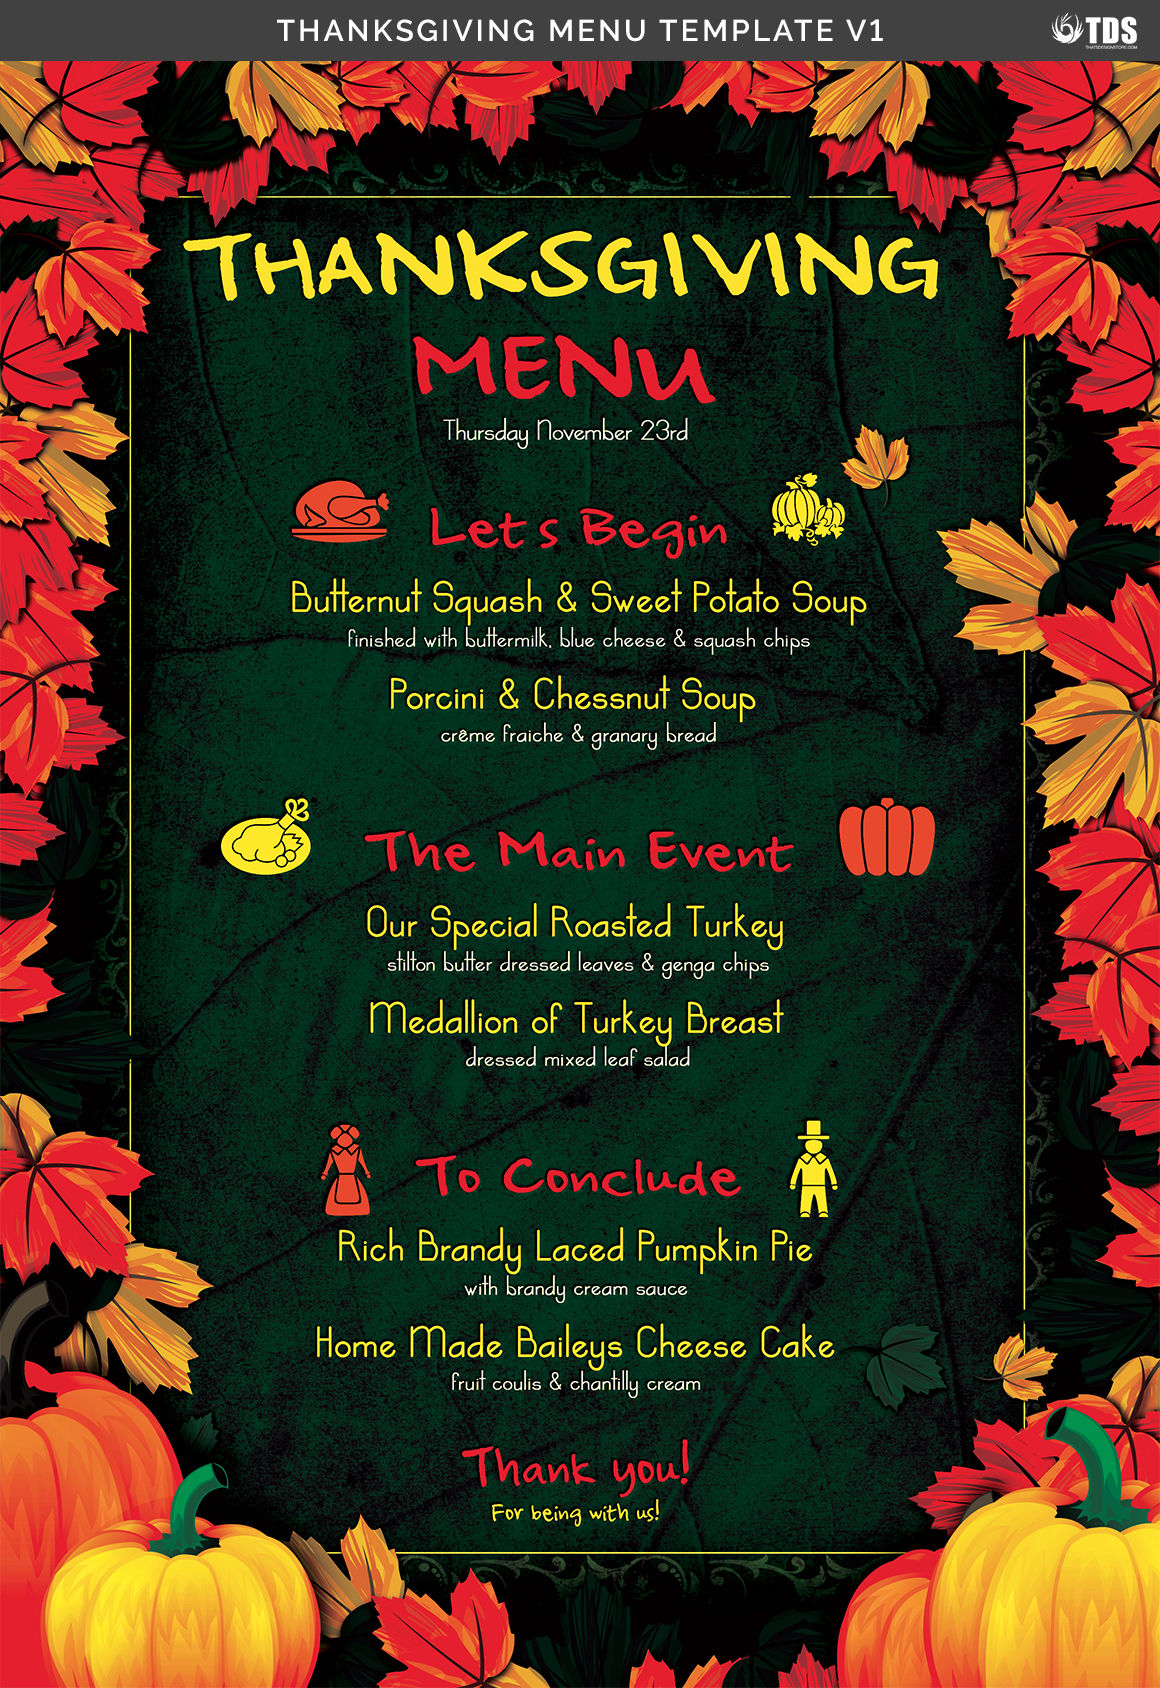 Thanksgiving Menu Template V1 By Thats Design Store